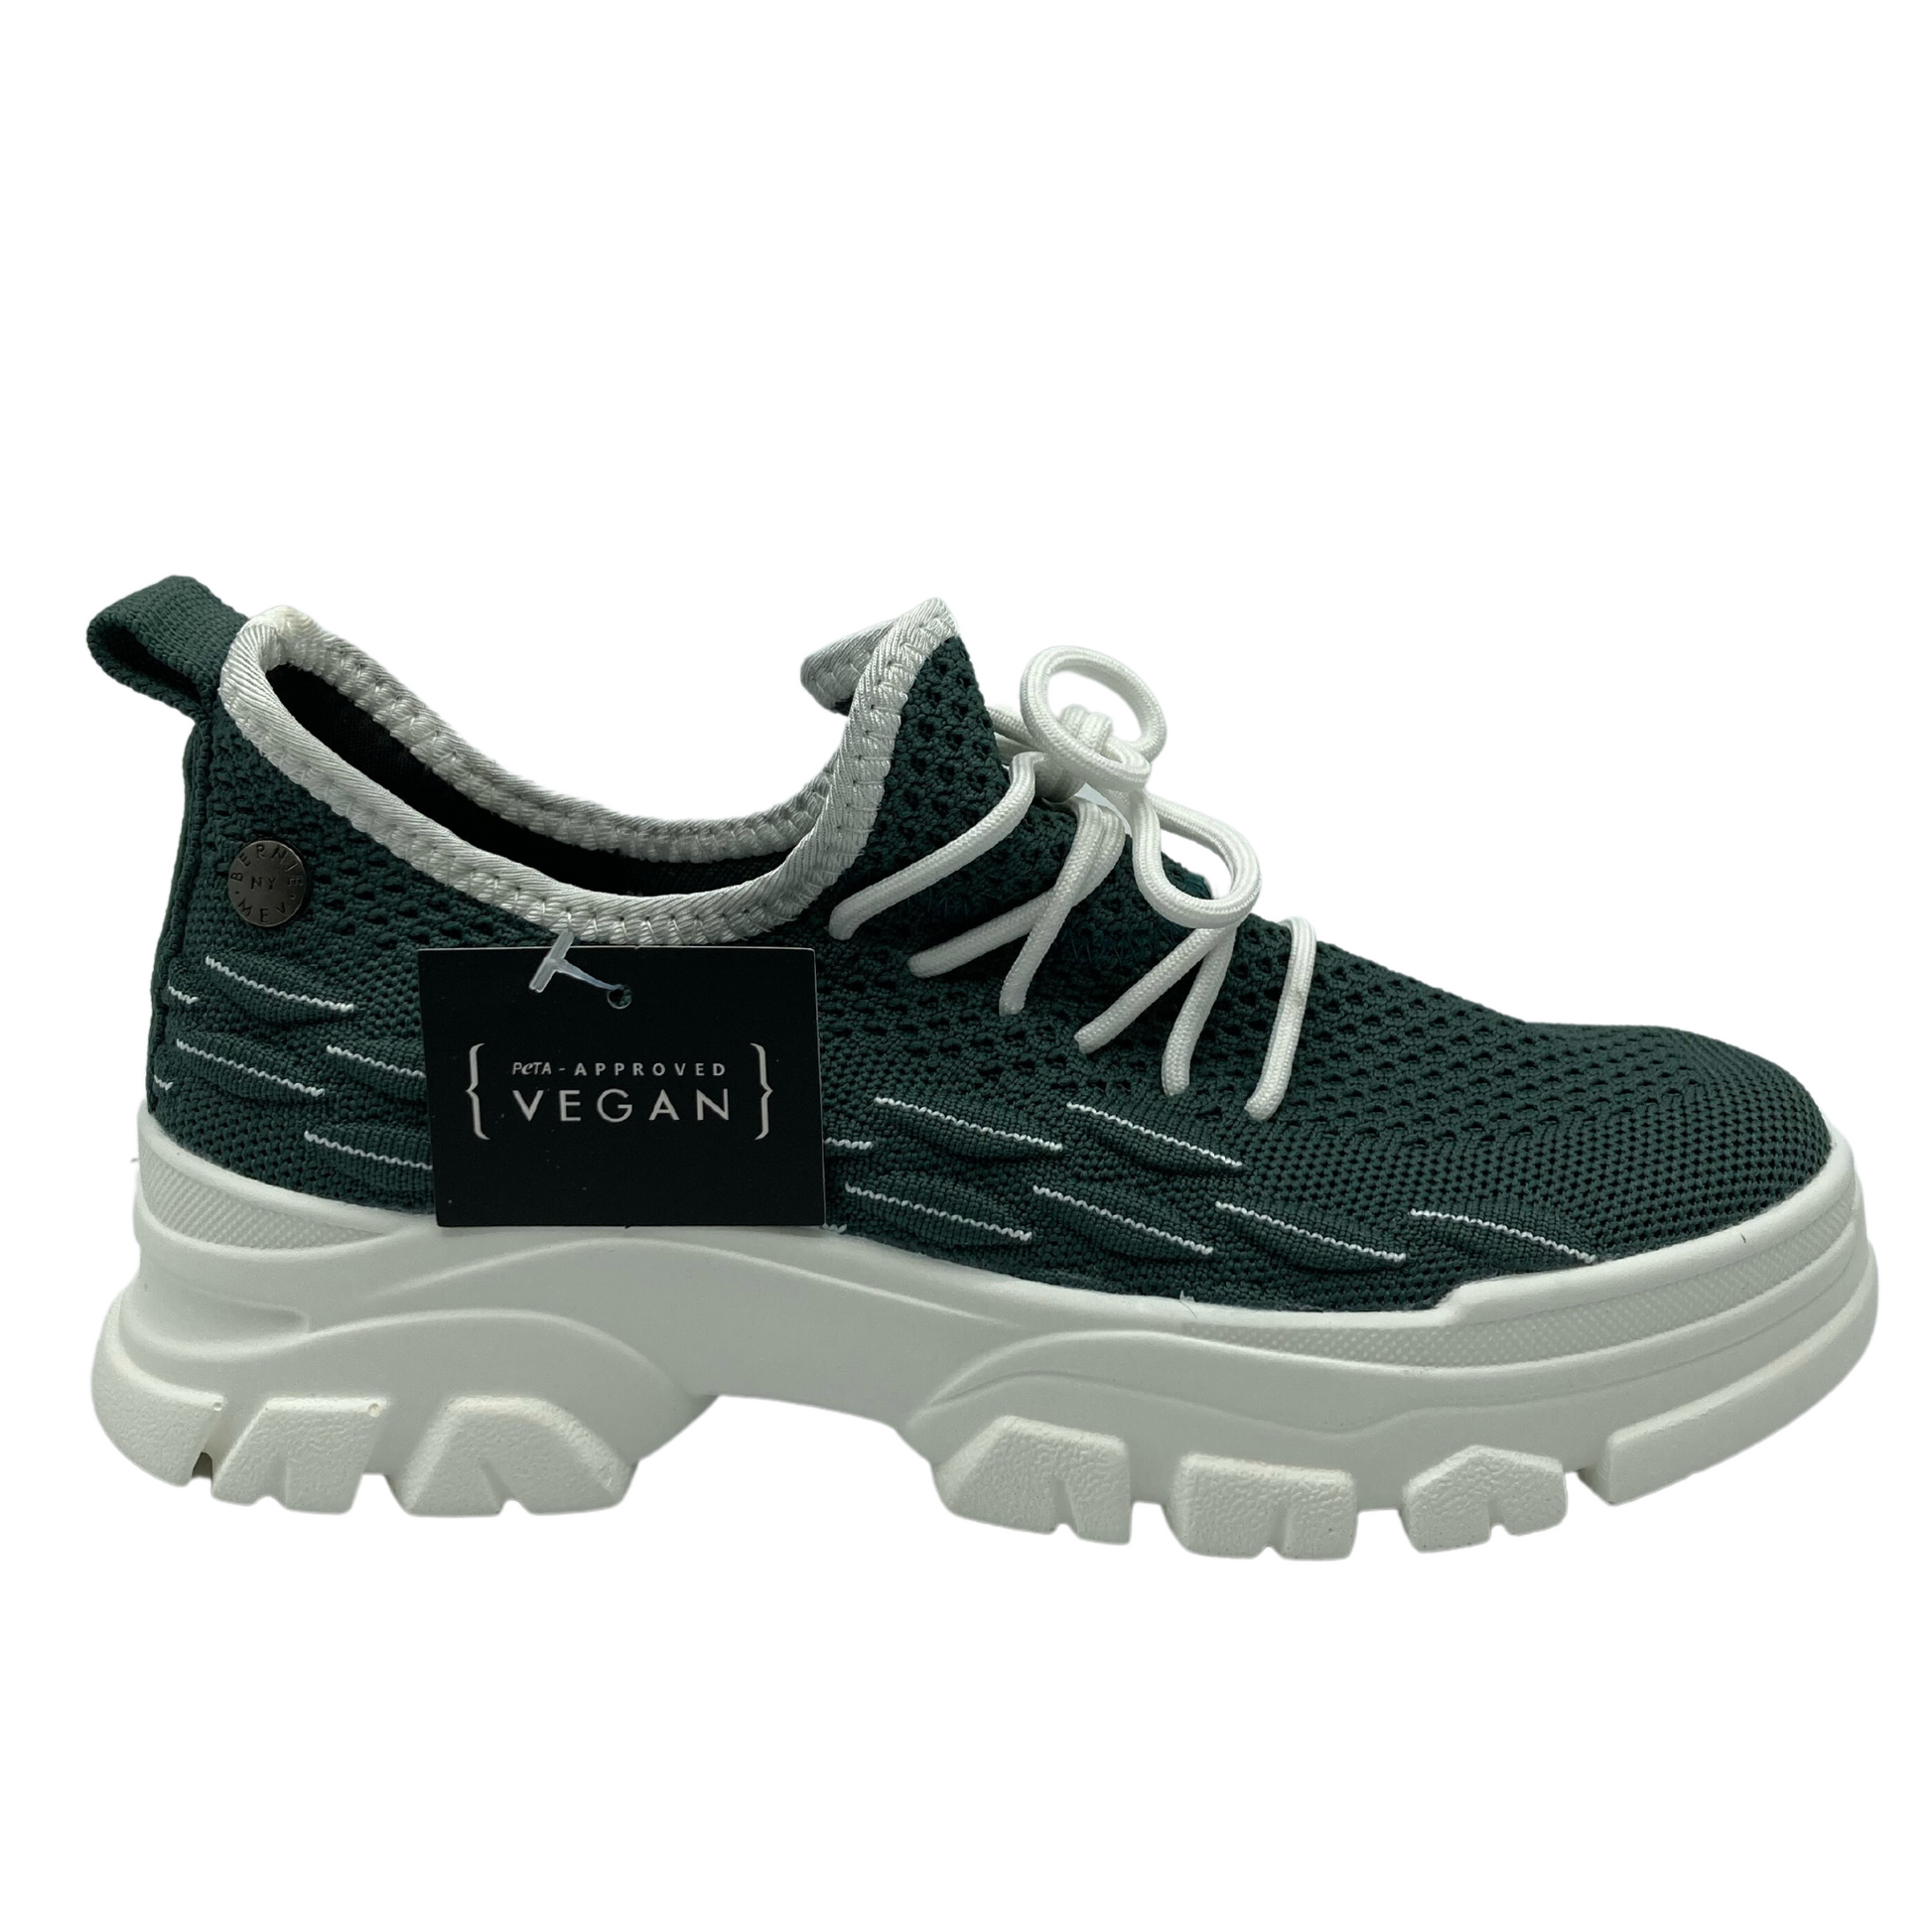 Right facing view of green mesh sneaker with white rubber platform sole and white laces